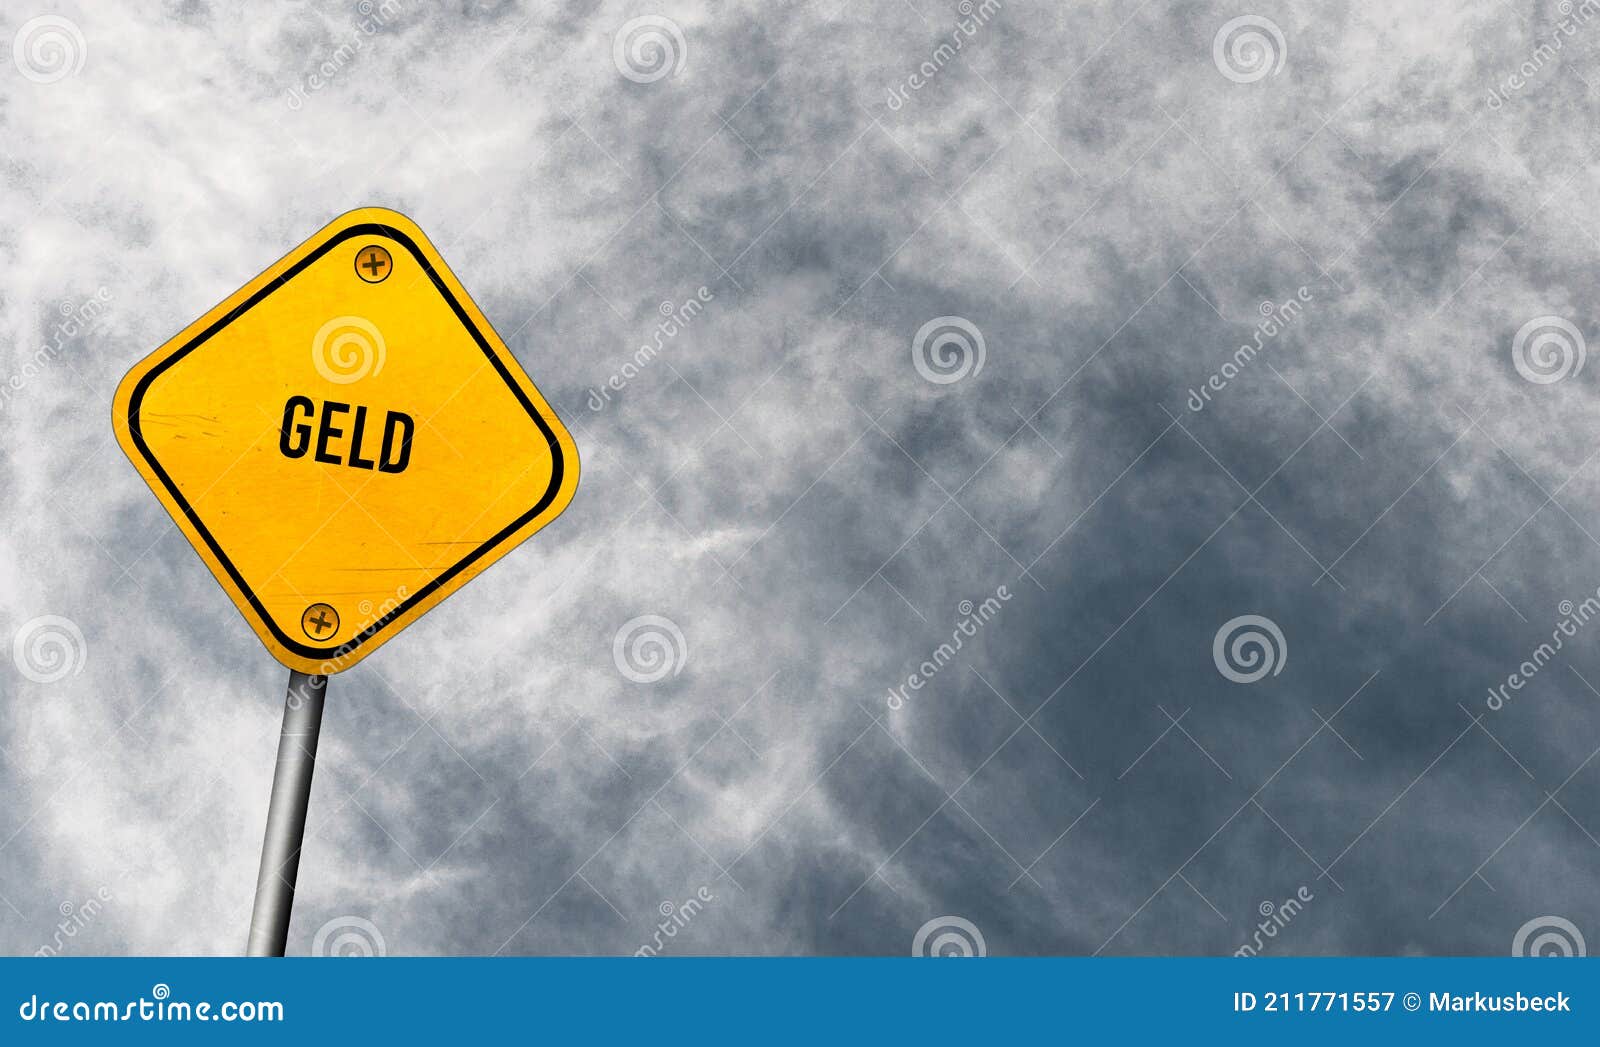 geld - yellow sign with cloudy sky